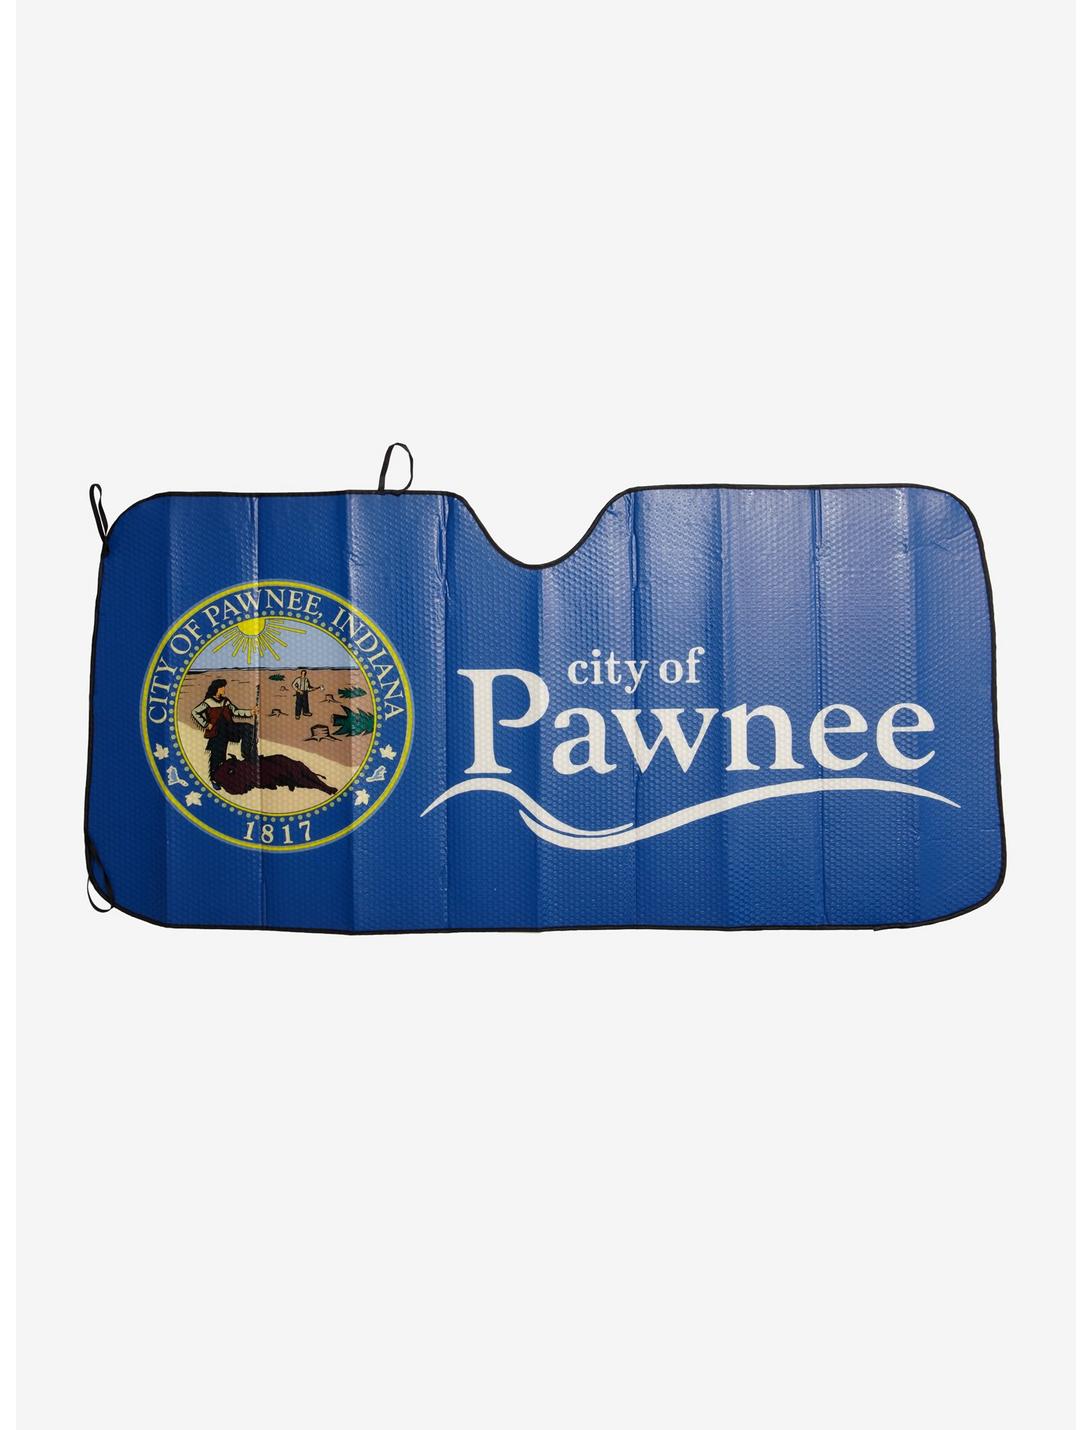 Parks and Recreation Pawnee Accordion Sunshade - BoxLunch Exclusive, , hi-res